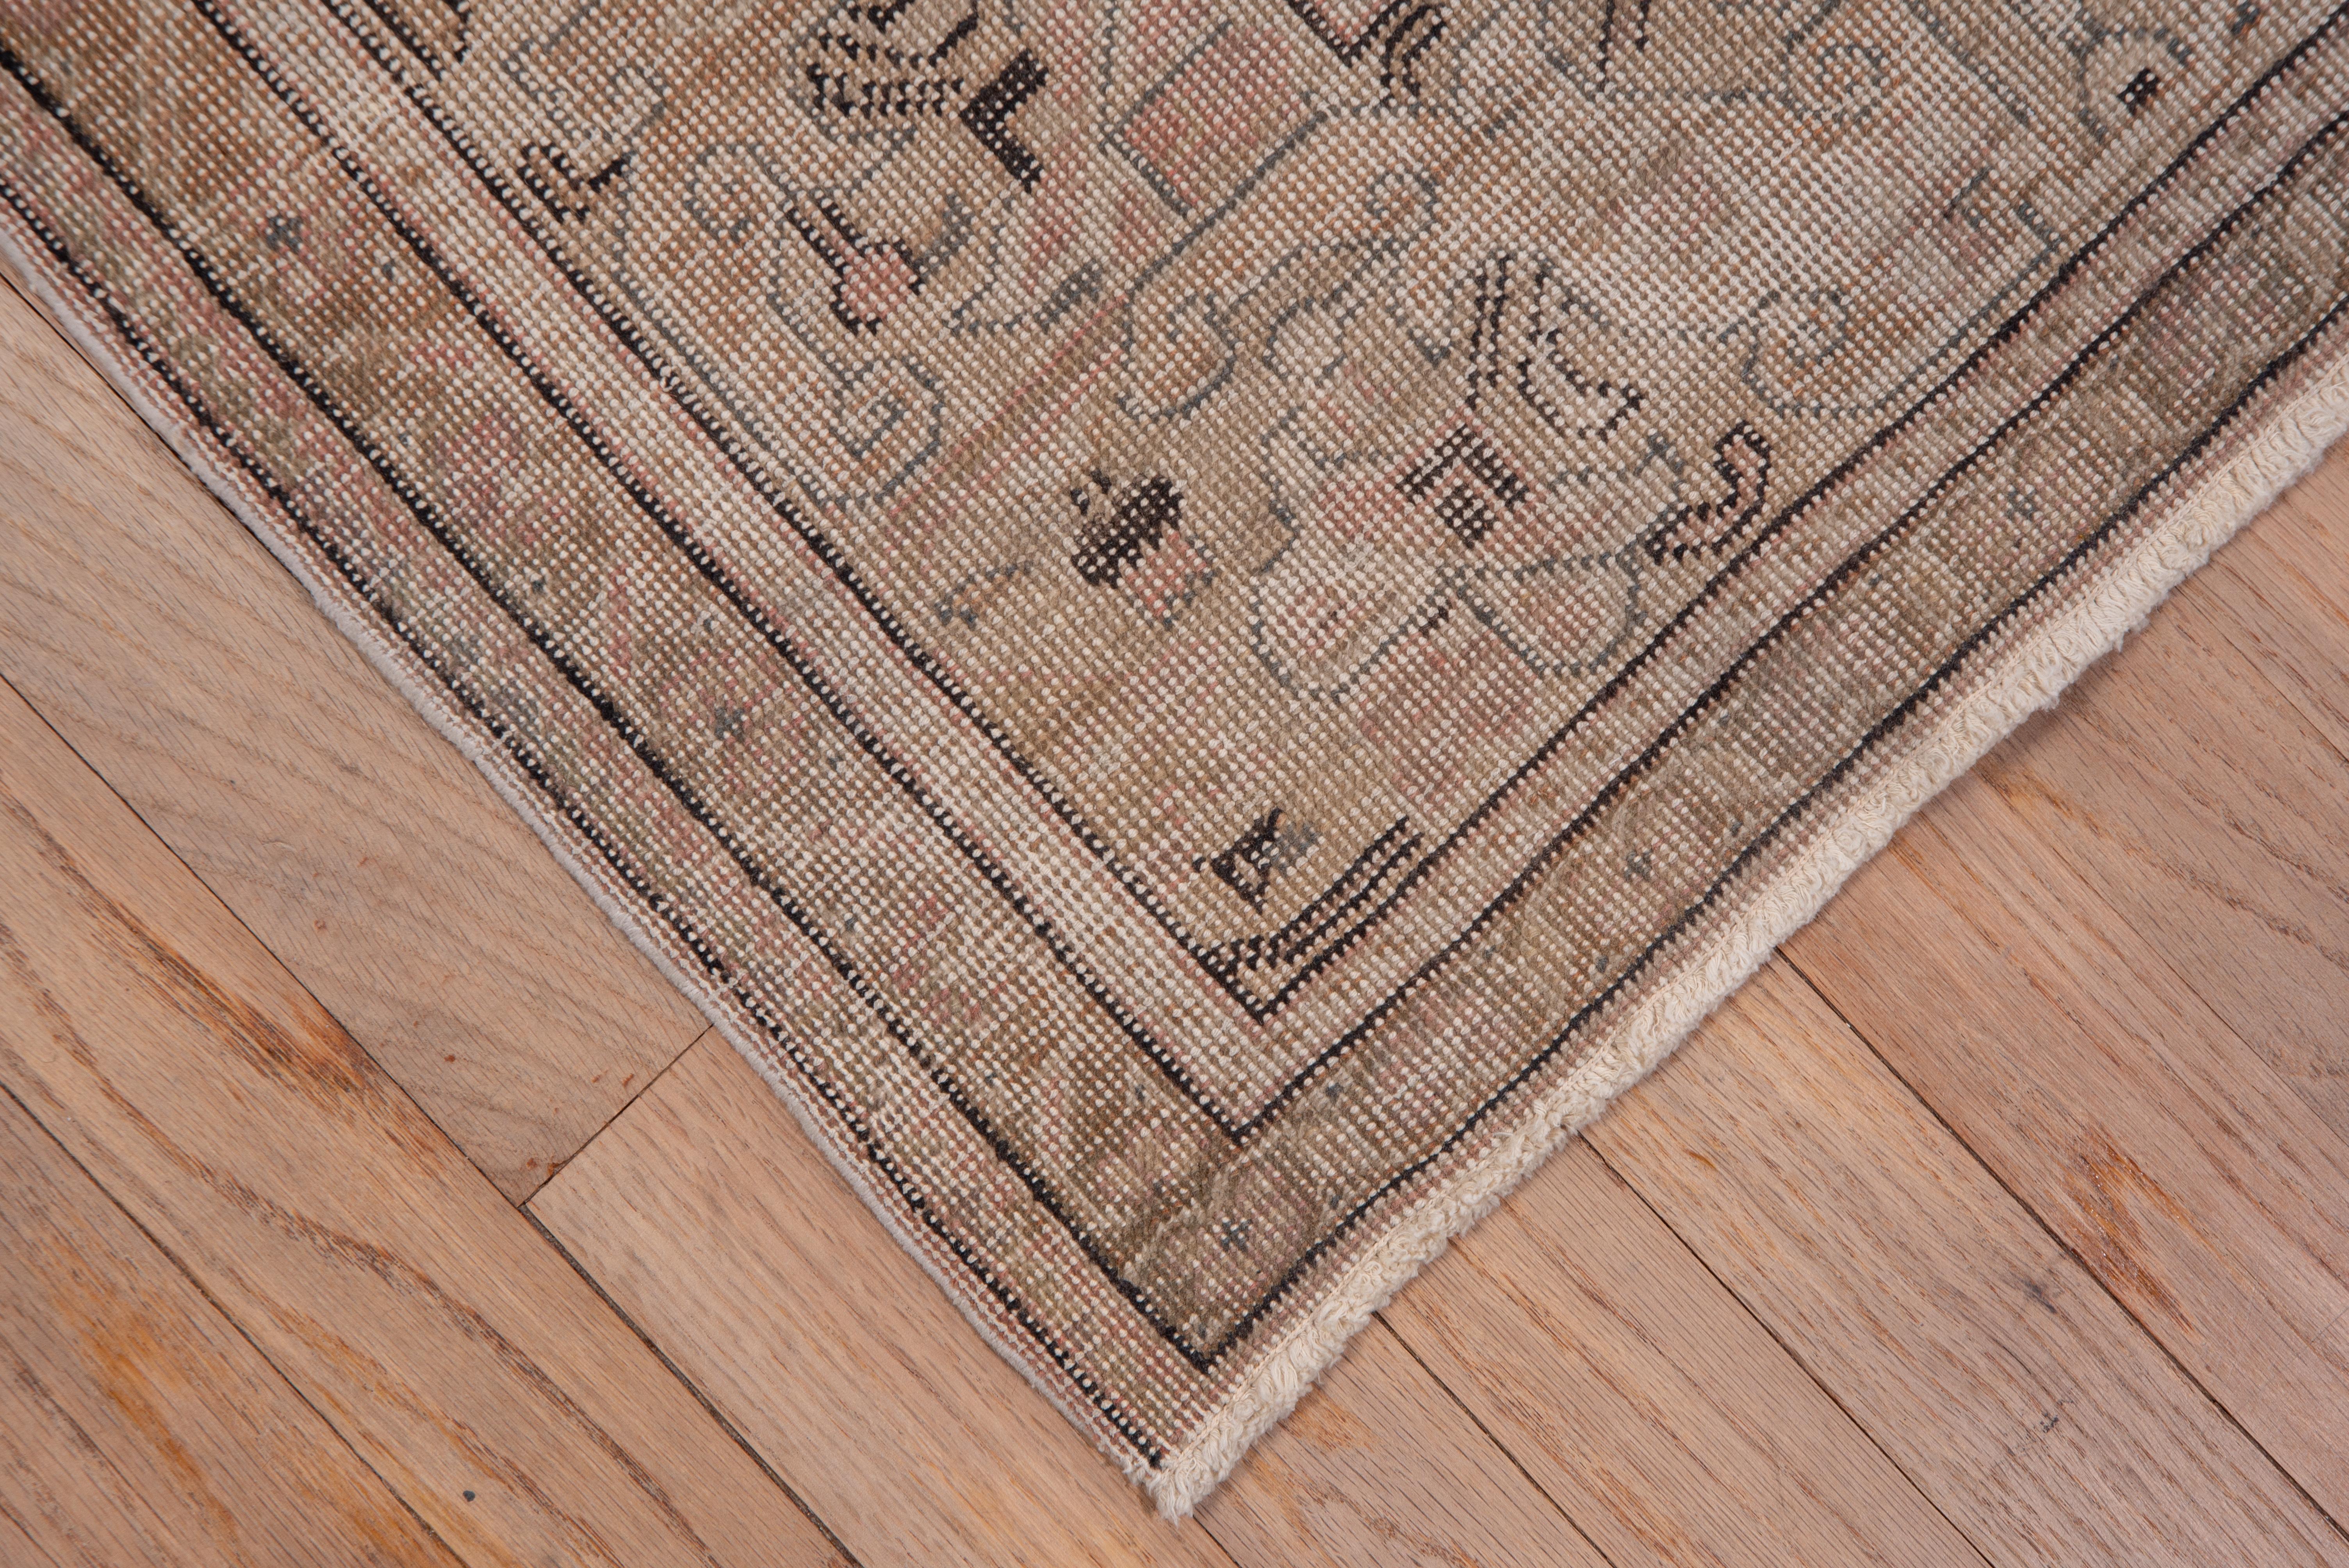 This rather distressed eastern Turkish city carpet has a Persianate design of large, angular, bent leaves, angled palmettes and a layered, ragged palmette/rosette central motif, all on a sandy ground with dark brown outlines.